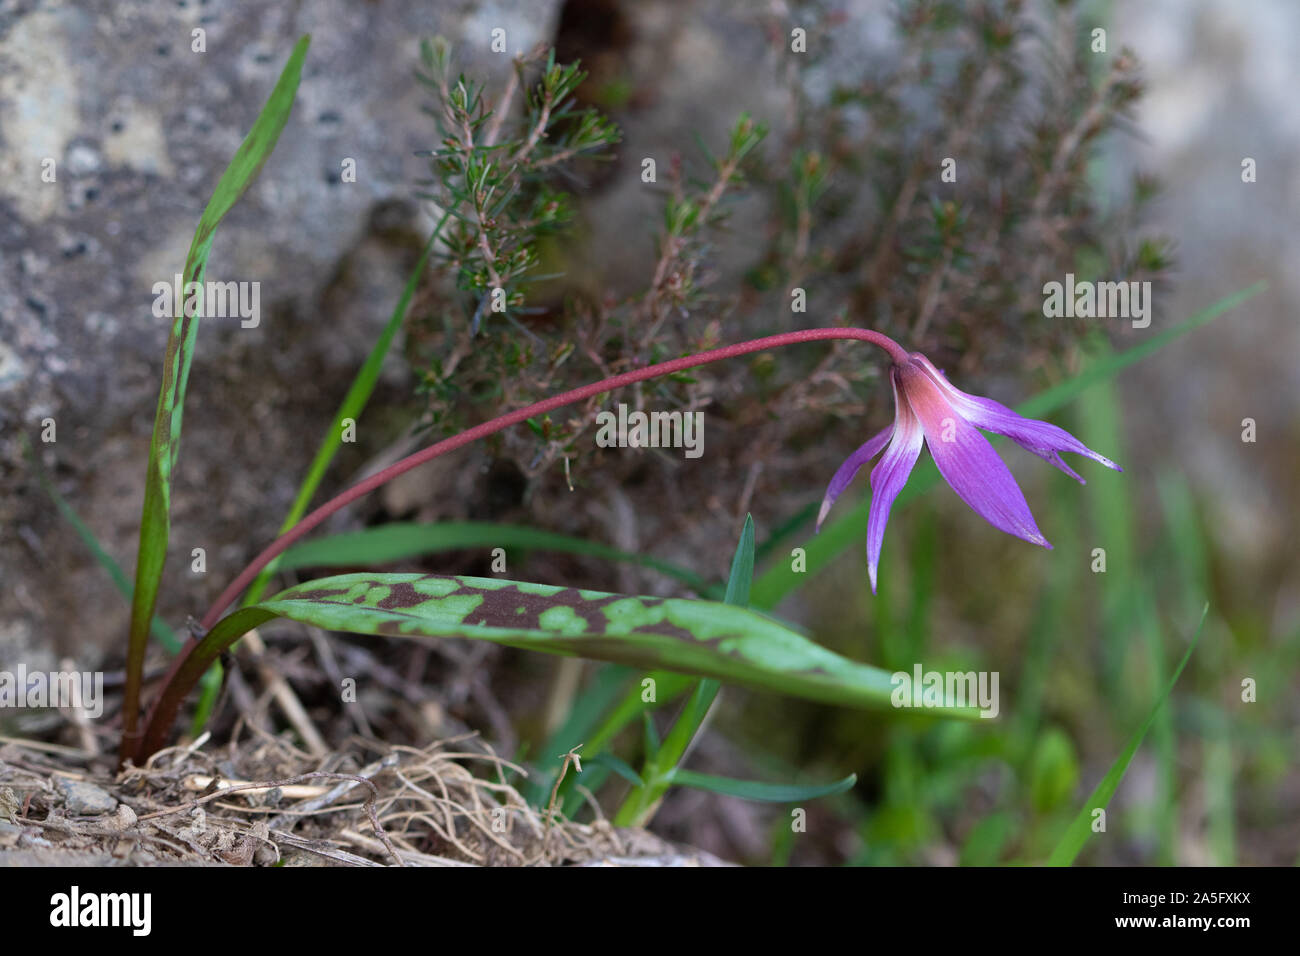 Dog's-tooth Violet (Erythronium dens-canis) flower Stock Photo